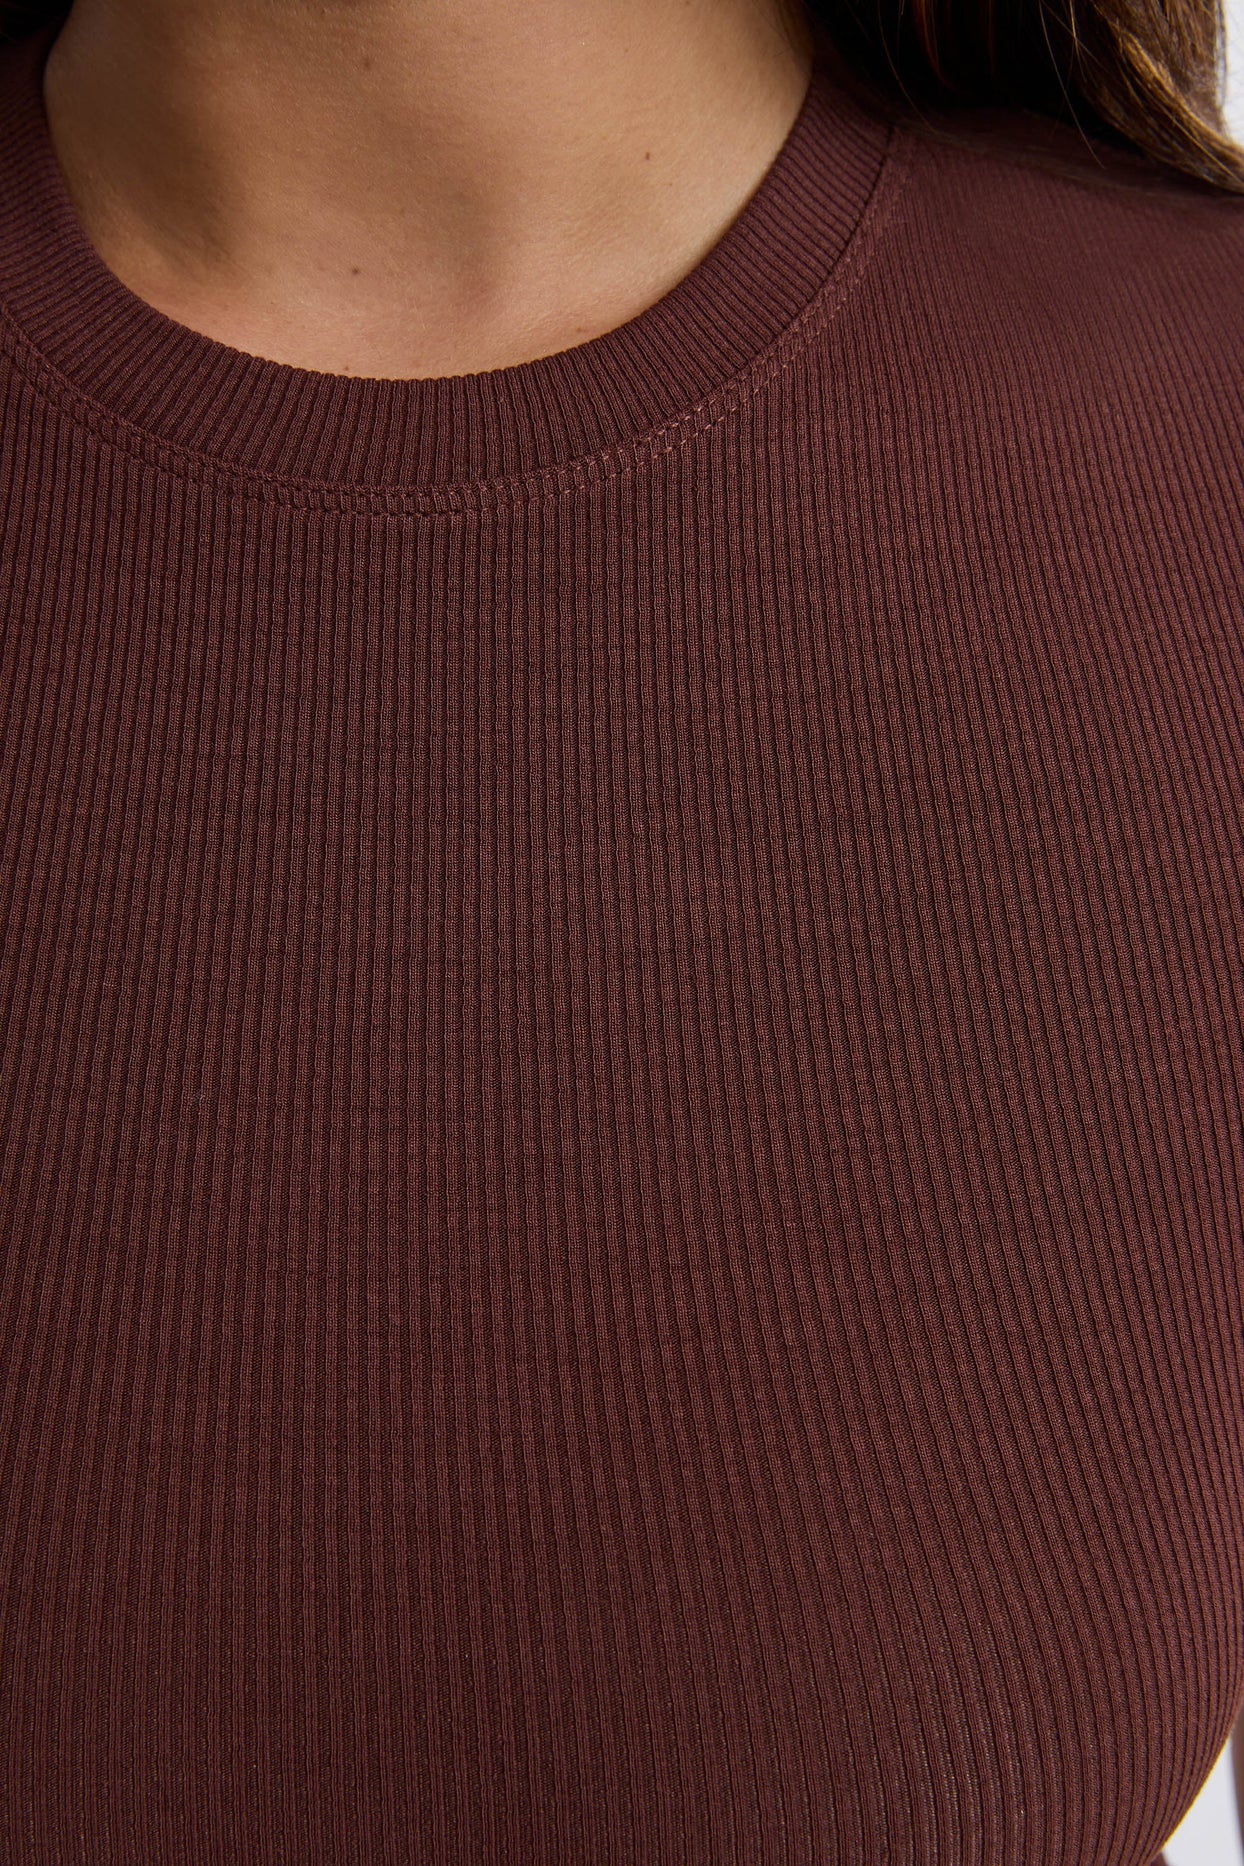 Ribbed Modal High Neck Top in Chocolate